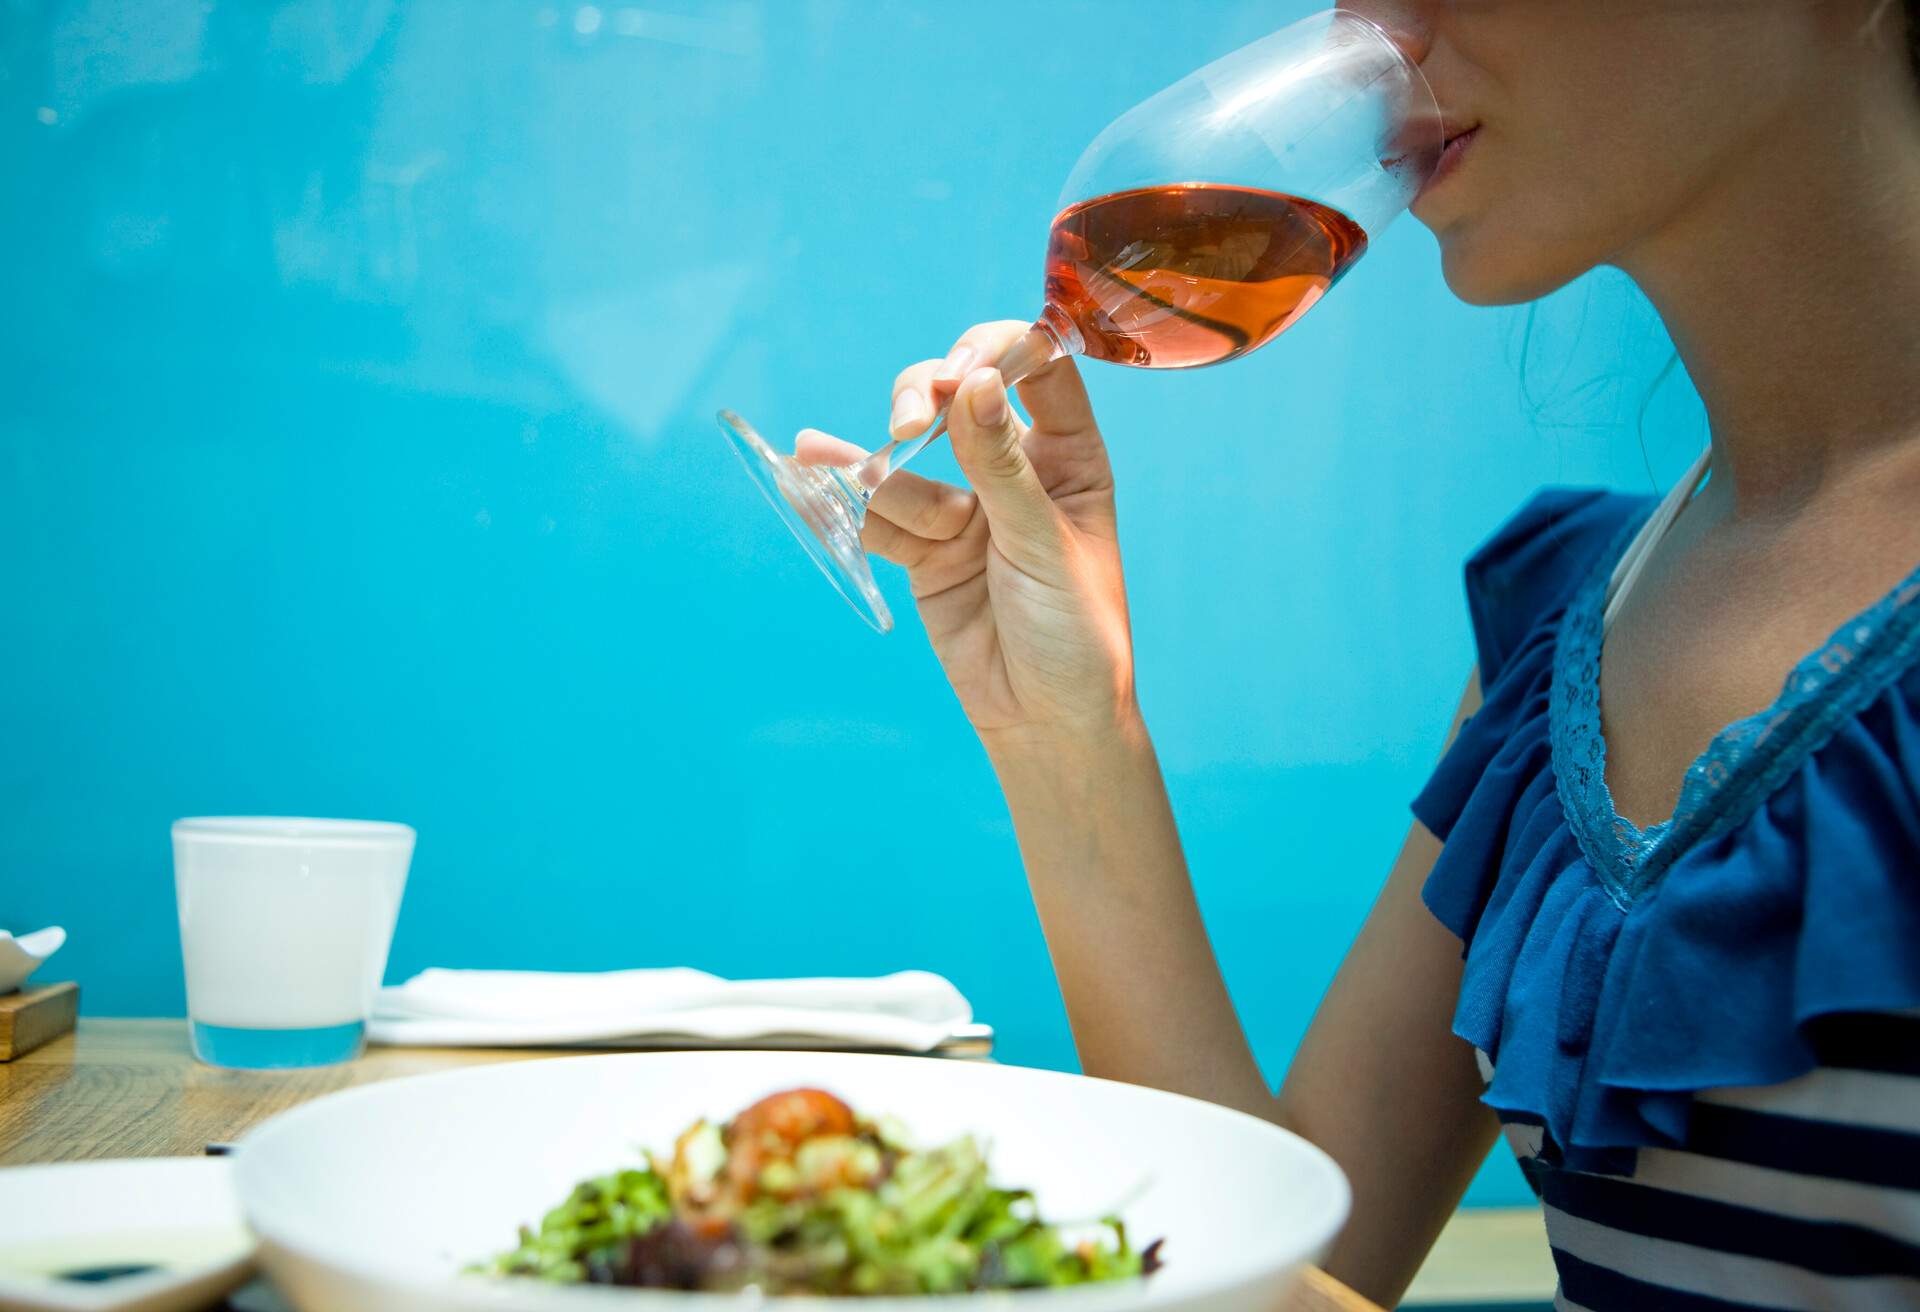 An individual with a meal and sipping from a glass of rose wine.